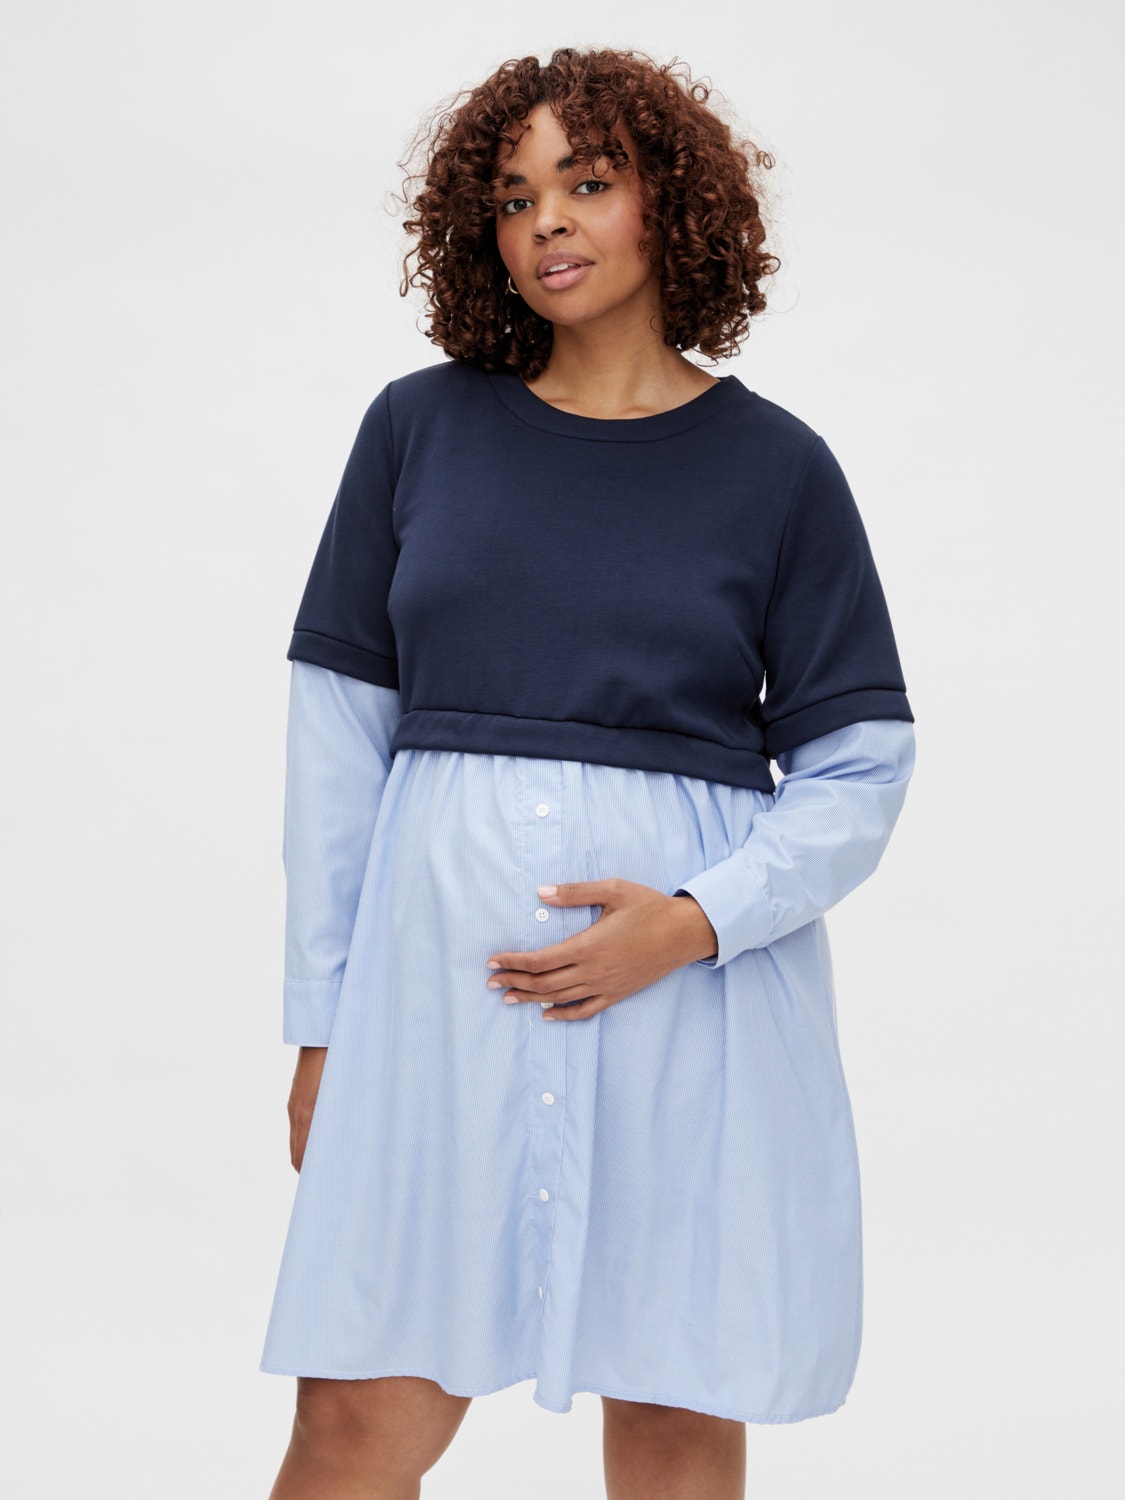 Mama.Licious Maternity sweater in navy